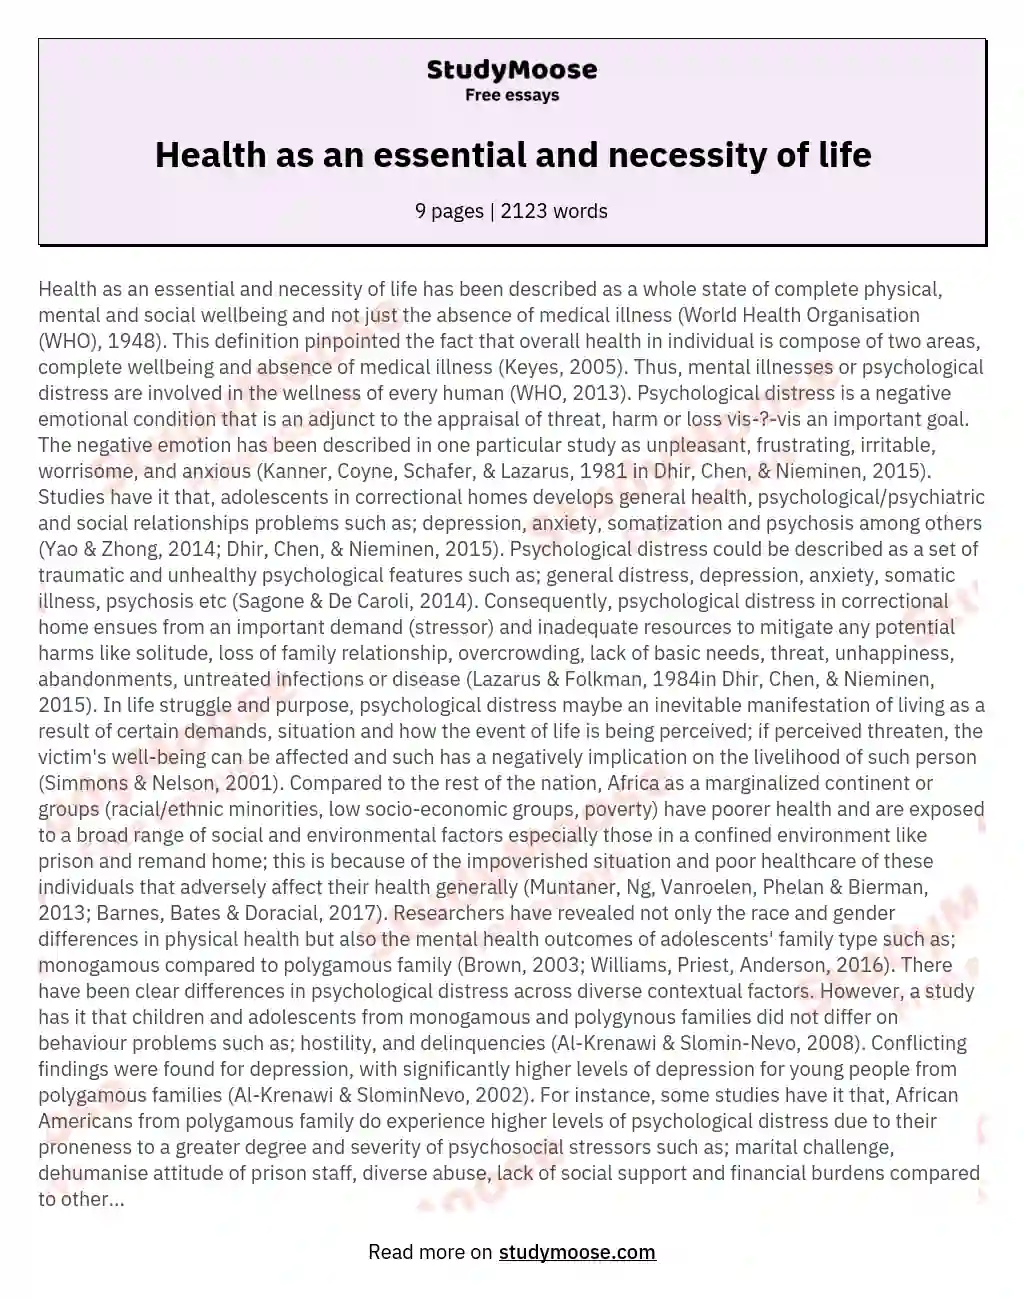 Health as an essential and necessity of life